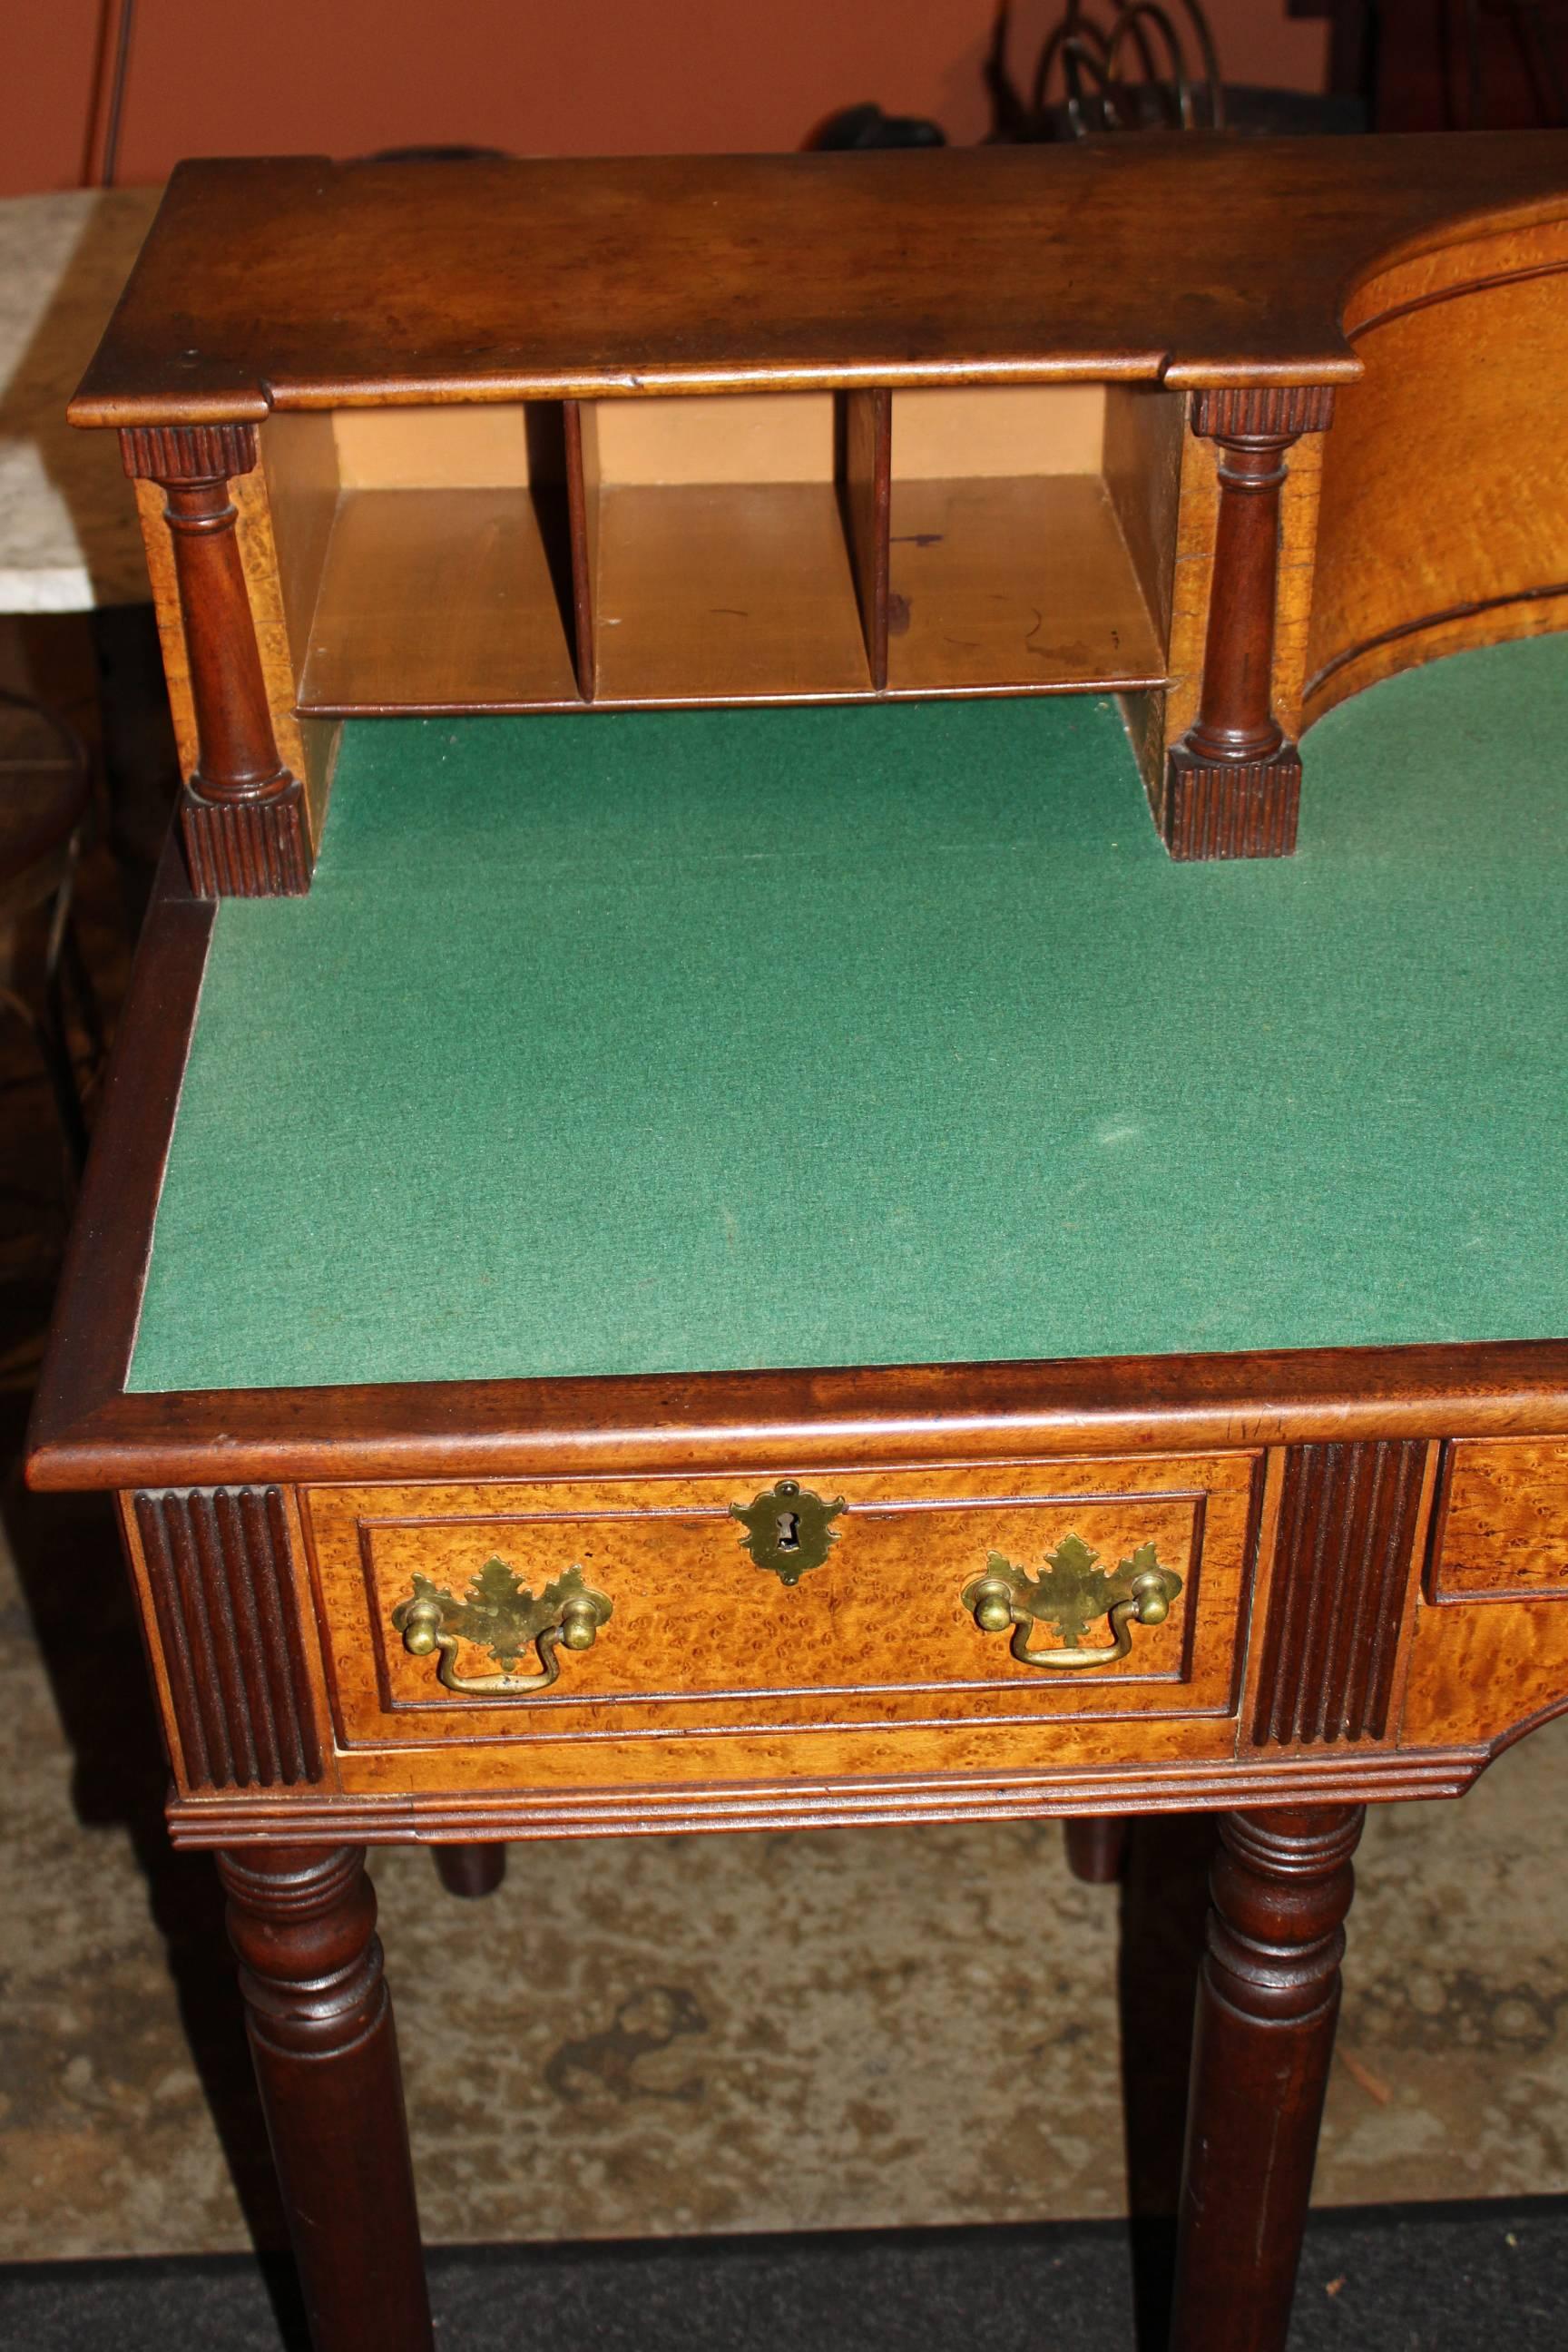 A rare early 19th century bird's-eye maple and mahogany state house desk made by Porter Blanchard of Concord, NH with beautifully shaped upper case, felted writing surface, open cubbies and half column pilasters, over a central long drawer flanked